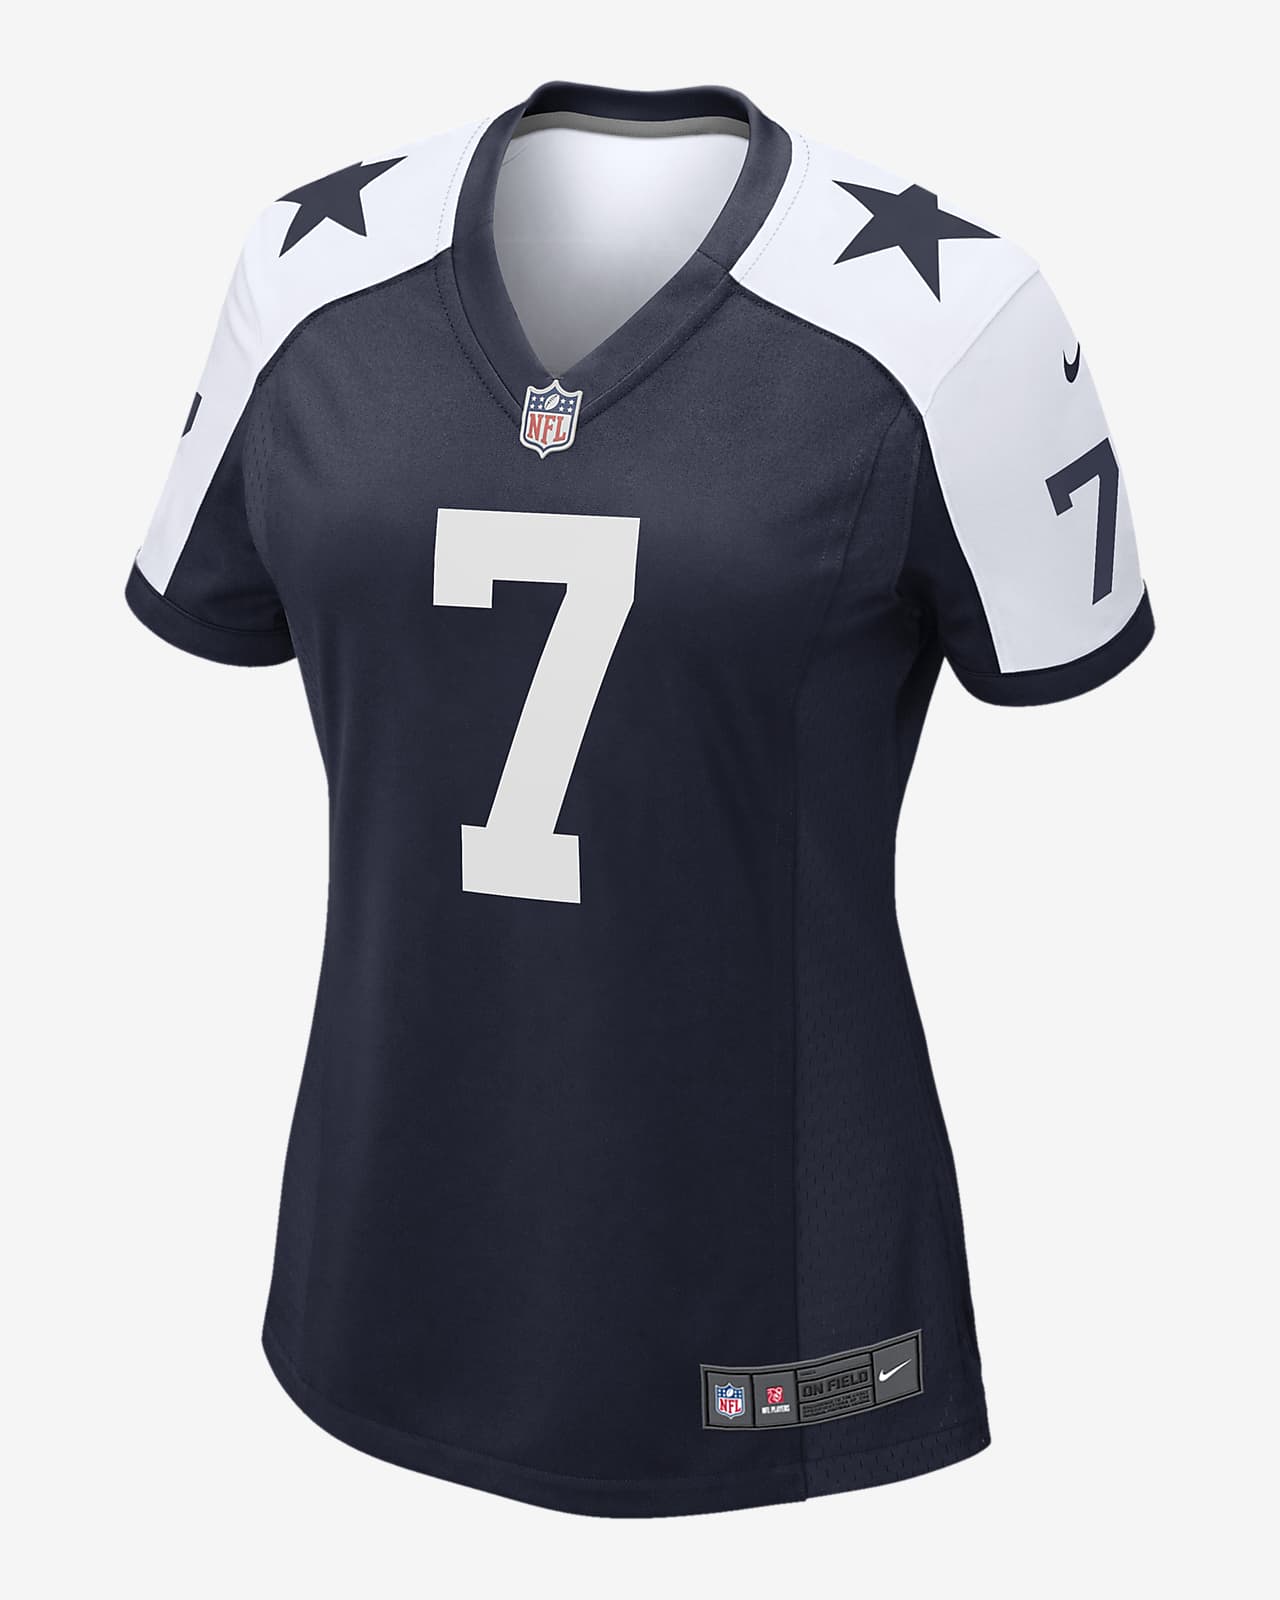 non nike nfl jersey